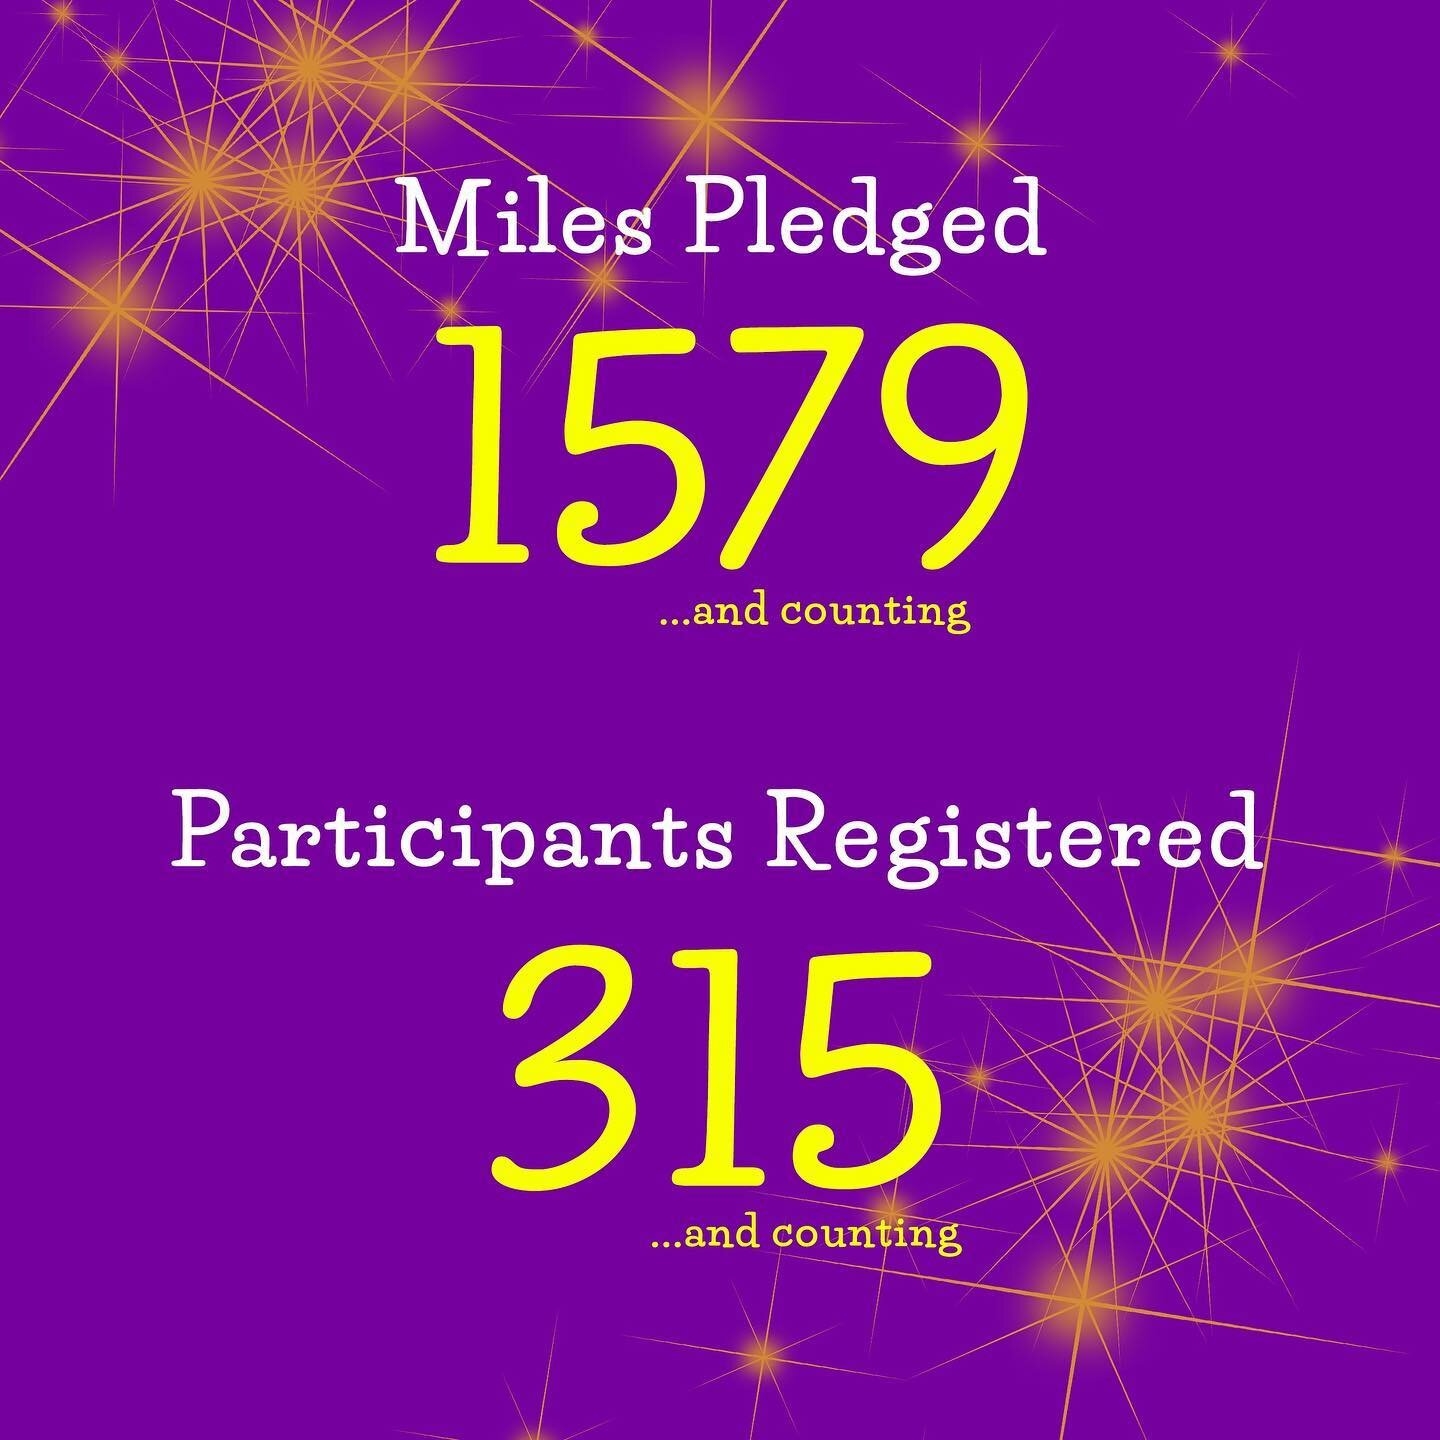 💜💛💜💛💜💛💜💛

There&rsquo;s still time! Link in bio to register for the 2nd Annual Miles For Smiles Virtual Challenge🏌️&zwj;♂️🚴🏼&zwj;♂️🏊🏼&zwj;♂️🏃🏻&zwj;♀️ #KeepSmilibg